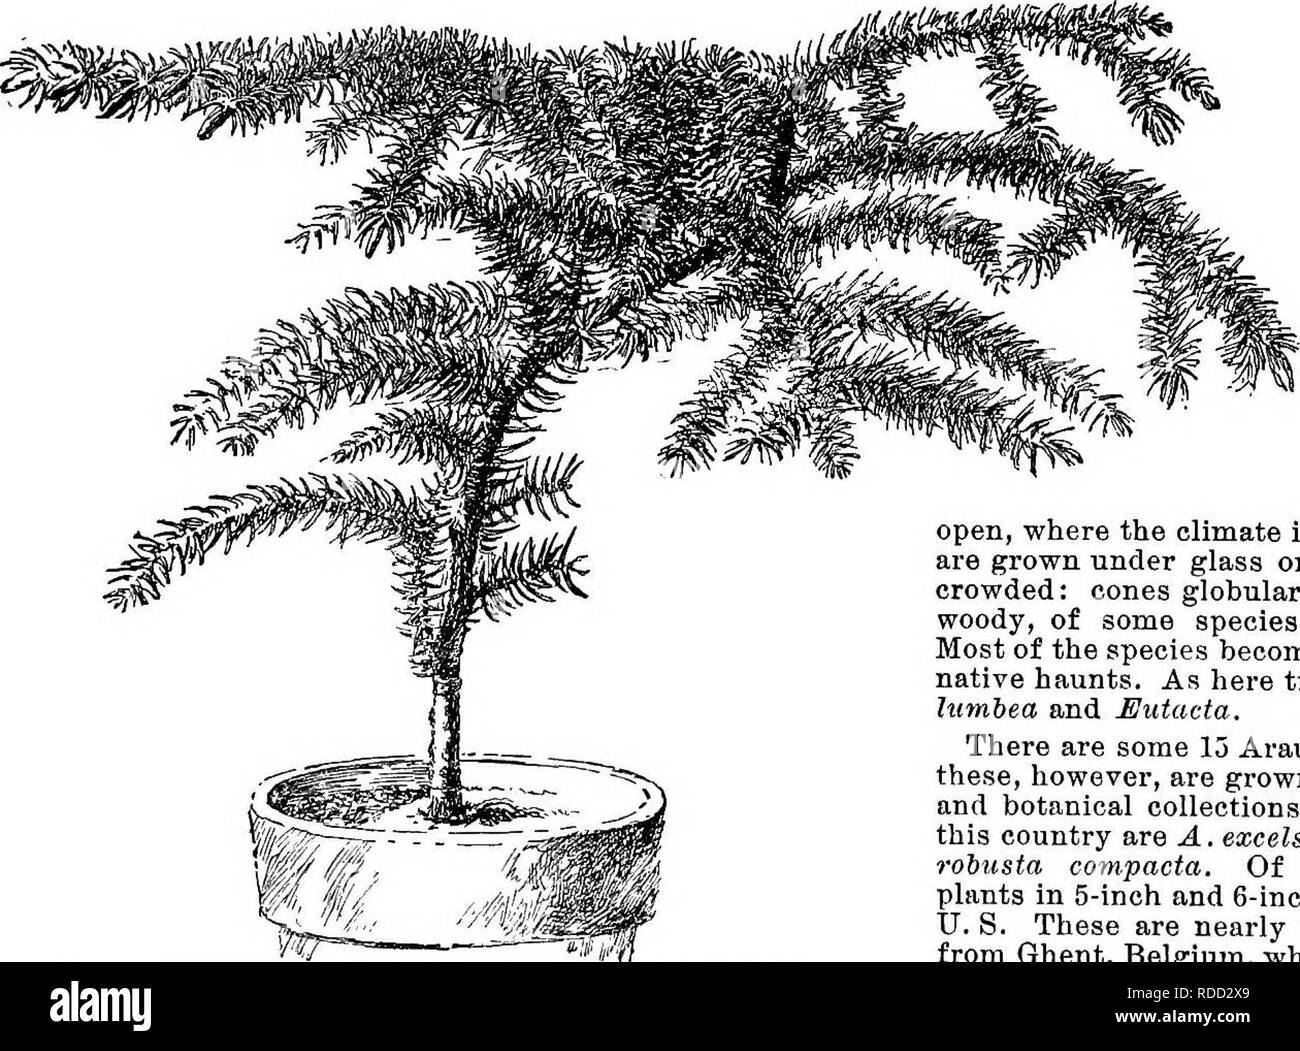 . Cyclopedia of American horticulture, comprising suggestions for cultivation of horticultural plants, descriptions of the species of fruits, vegetables, flowers, and ornamental plants sold in the United States and Canada, together with geographical and biographical sketches. Gardening. 88 ARALIA ABAUCARIA deep green and purple ribbed. Polynesia. l.H. 23:240. R.H. 1891, p. 224. Gn. 39, p. 565. A.G. 19:374.-Oue of the best. A. Ohairiiri, Hort.; see Elasodendron.—4. erassifdlia, So- land ; see Pseudopanax.—A. Idngipes, Hort. Lvs. digitate, tlie Ifts. oblong-lanceolate, acuminate, wavy. N, Austra Stock Photo